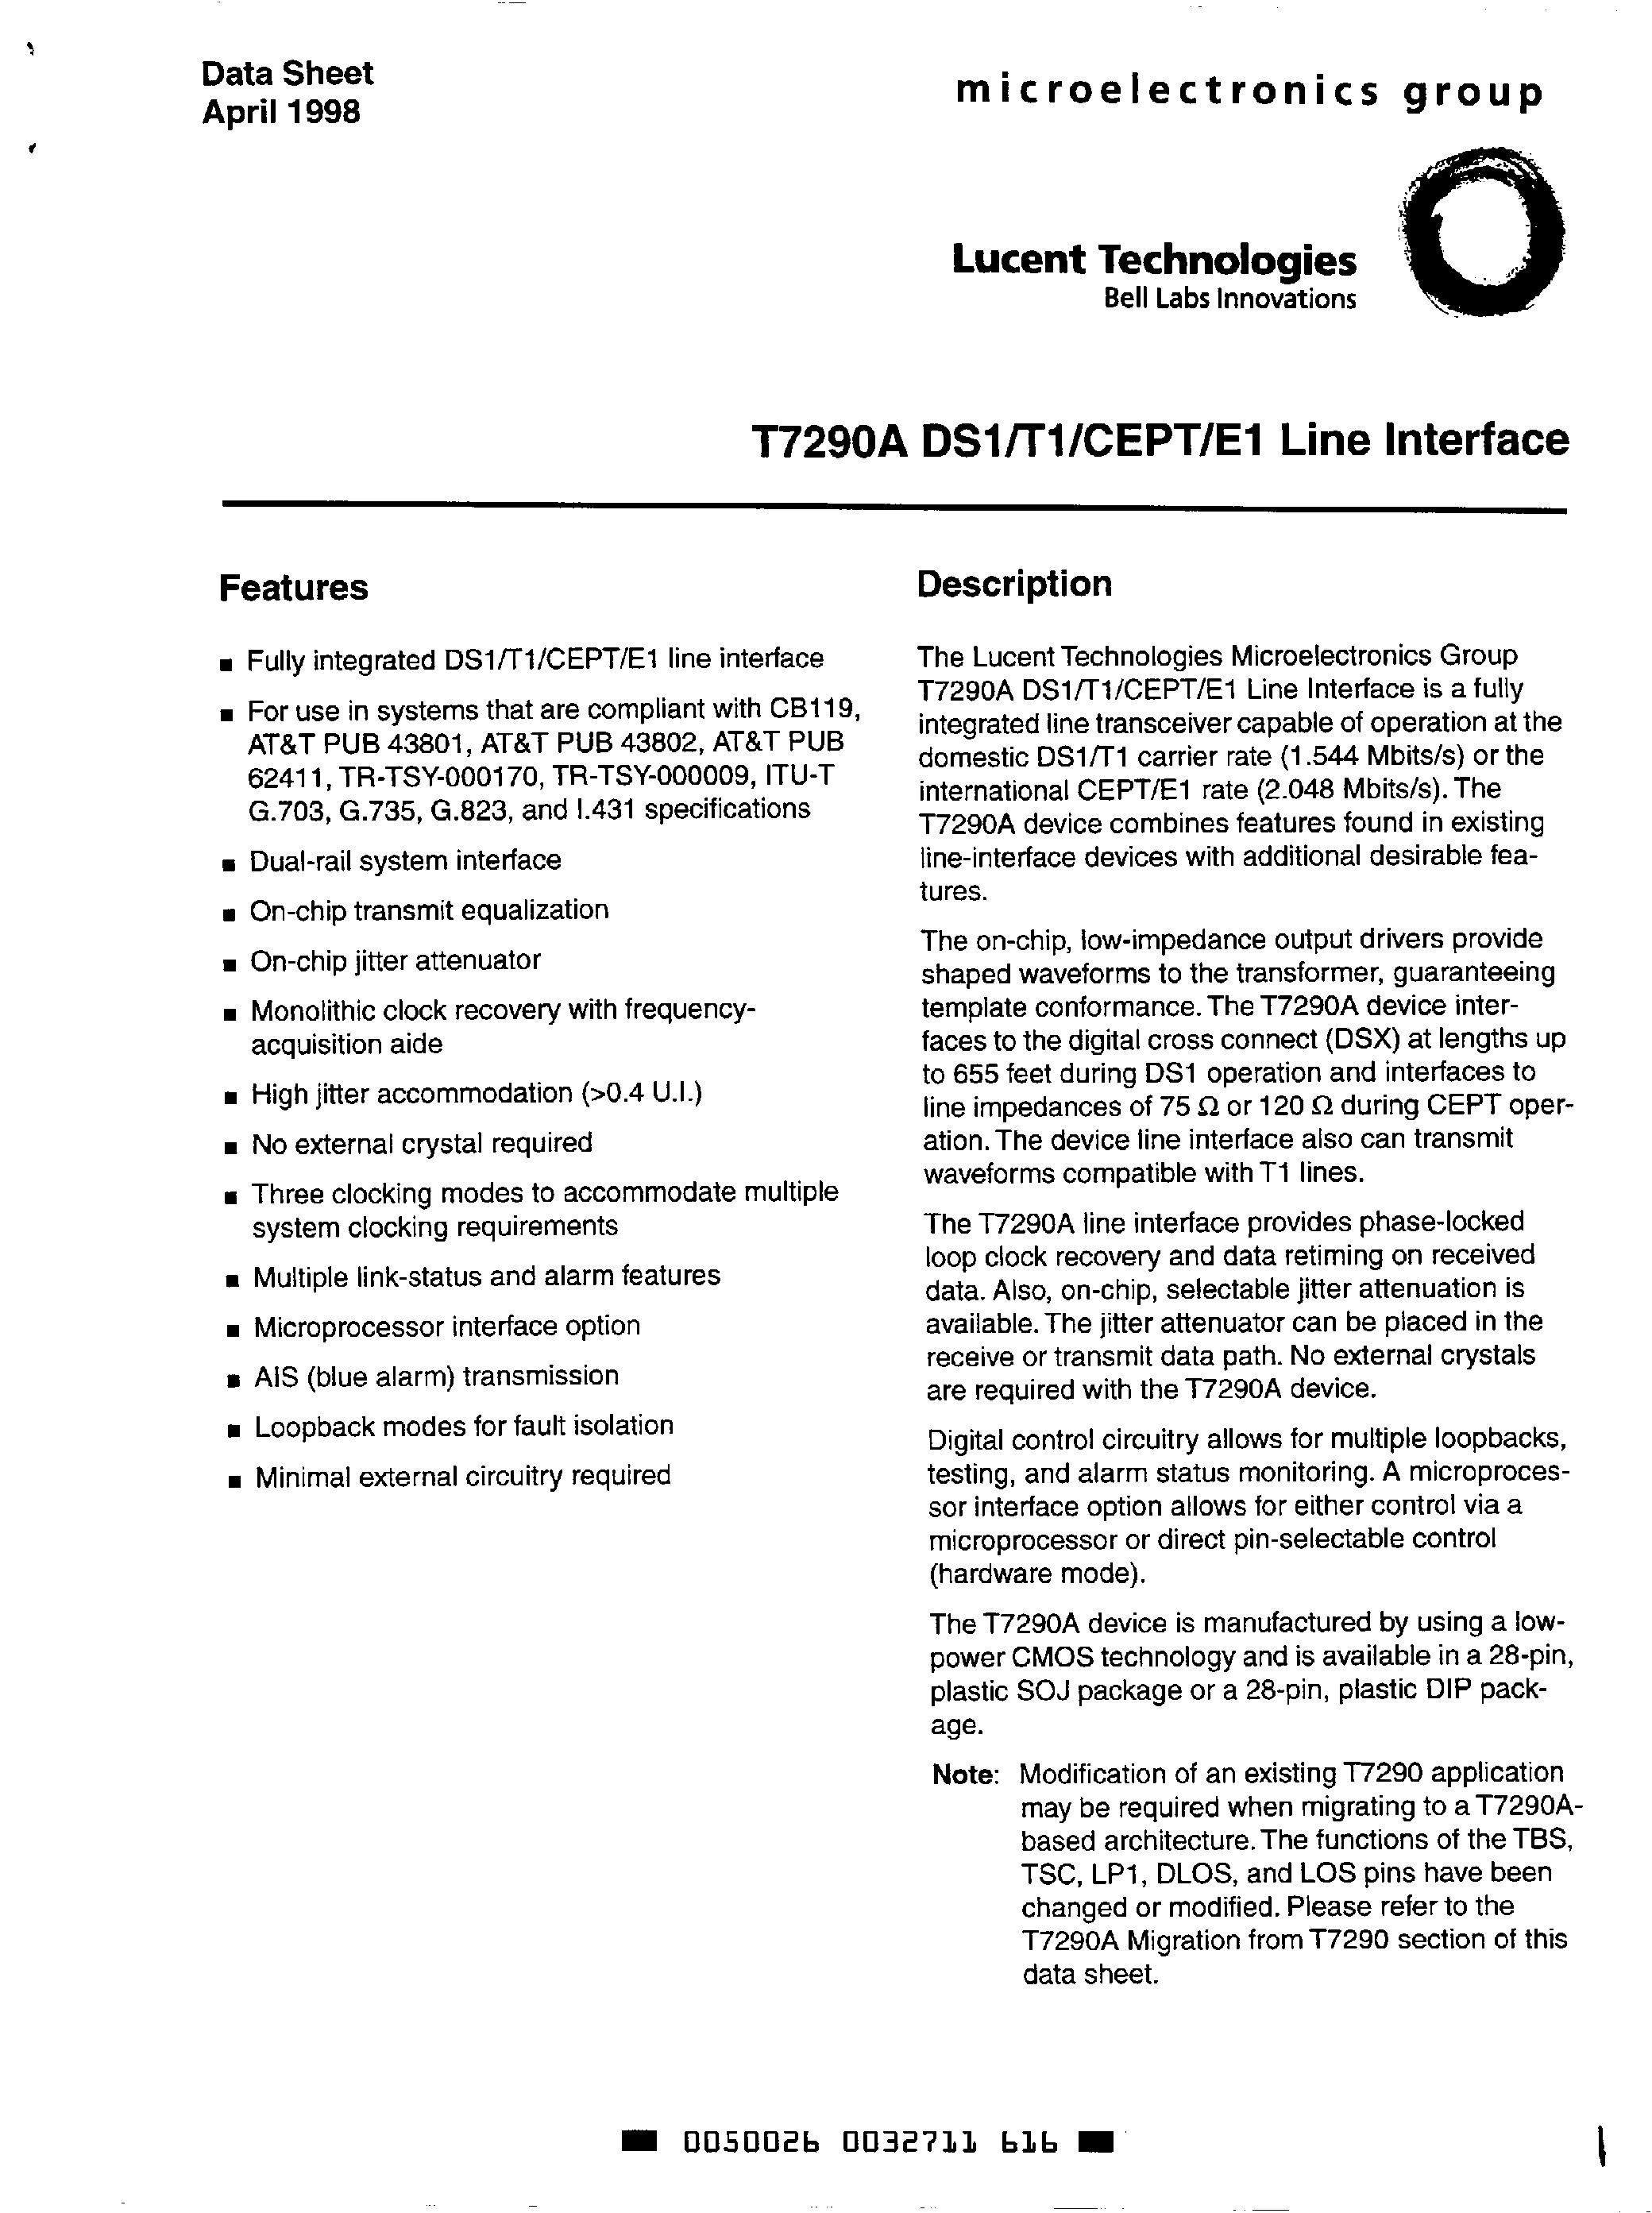 Datasheet T-7290A - CEPT Line Interface page 1